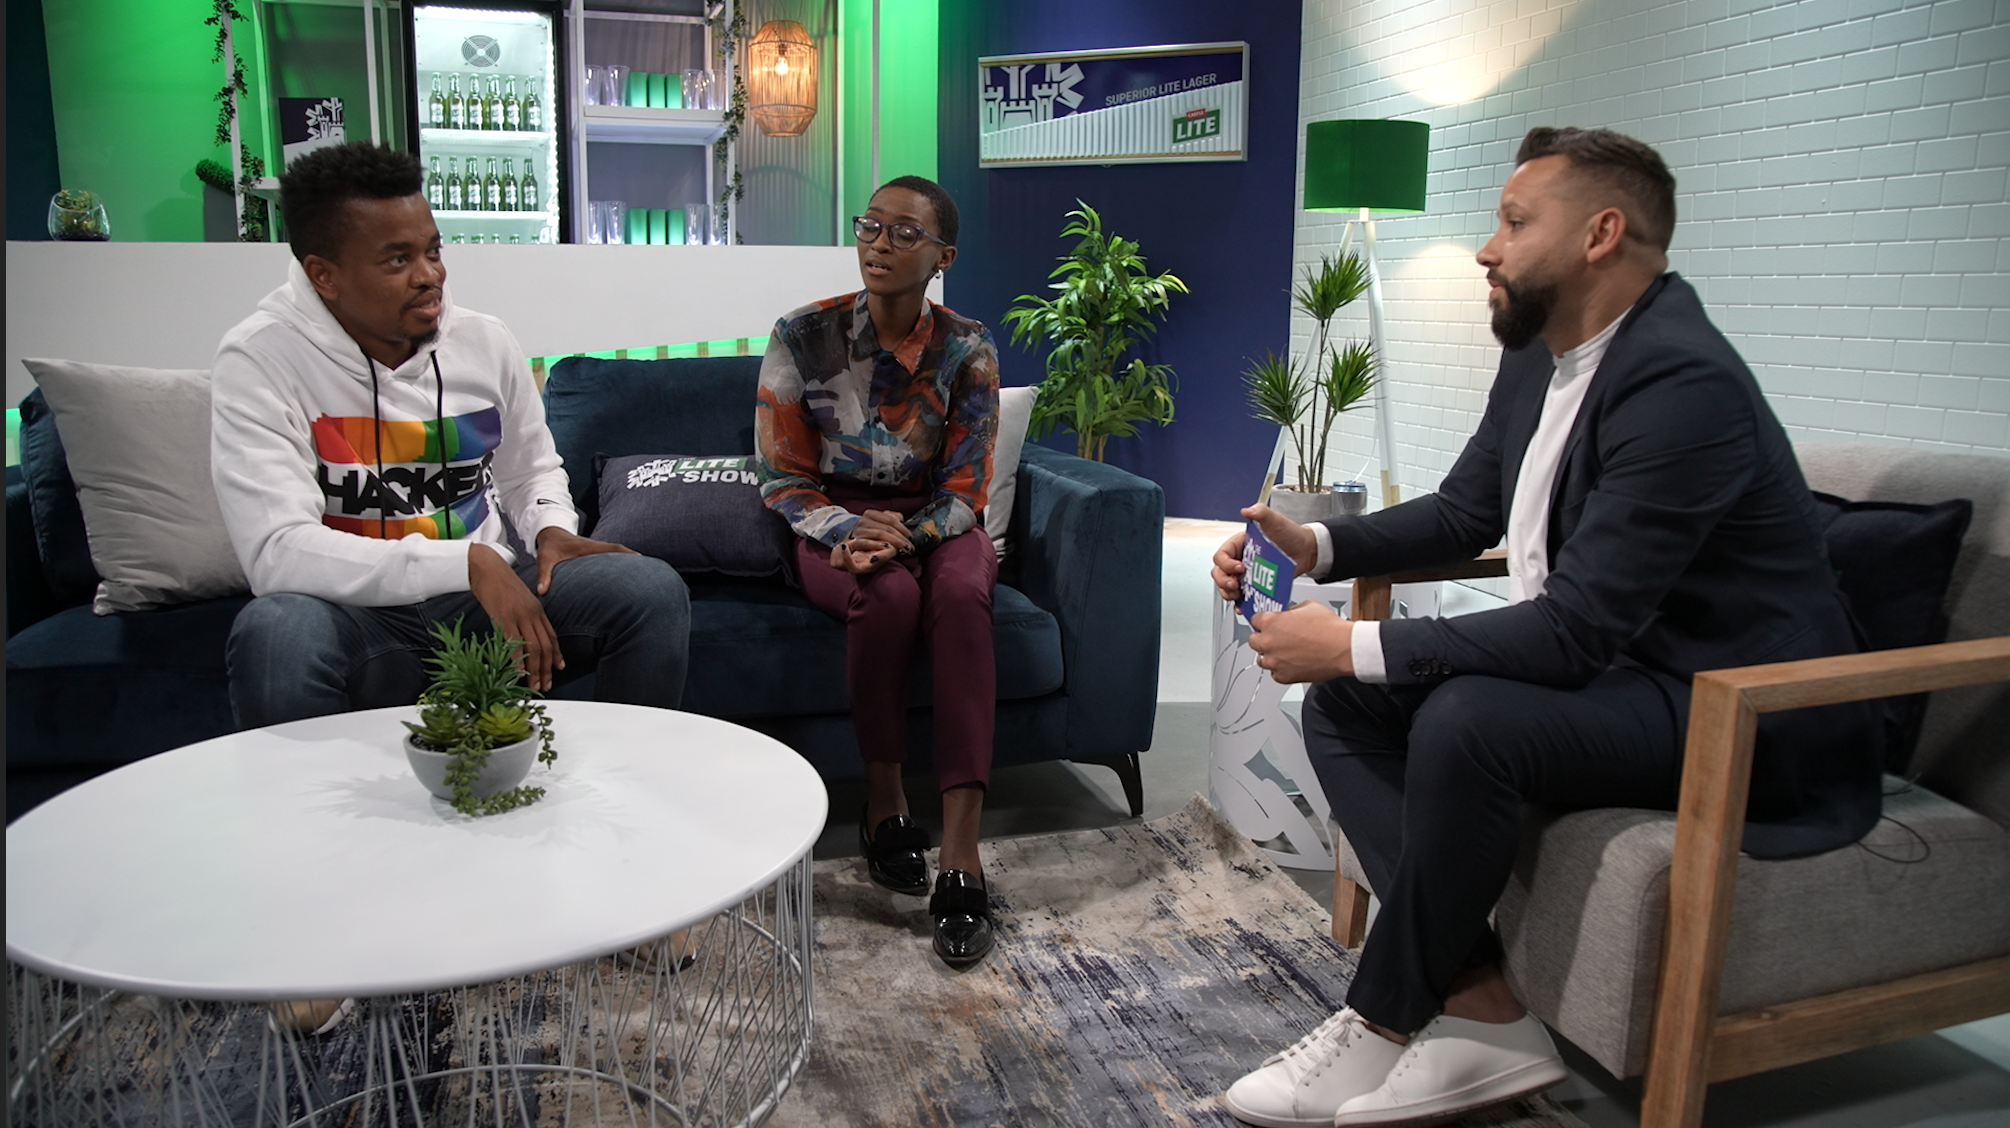 WATCH| Mpho Popps shares stories of his humble beginnings with host Donovan Goliath in Episode 3 of The Lite Show, EntertainmentSA News South Africa